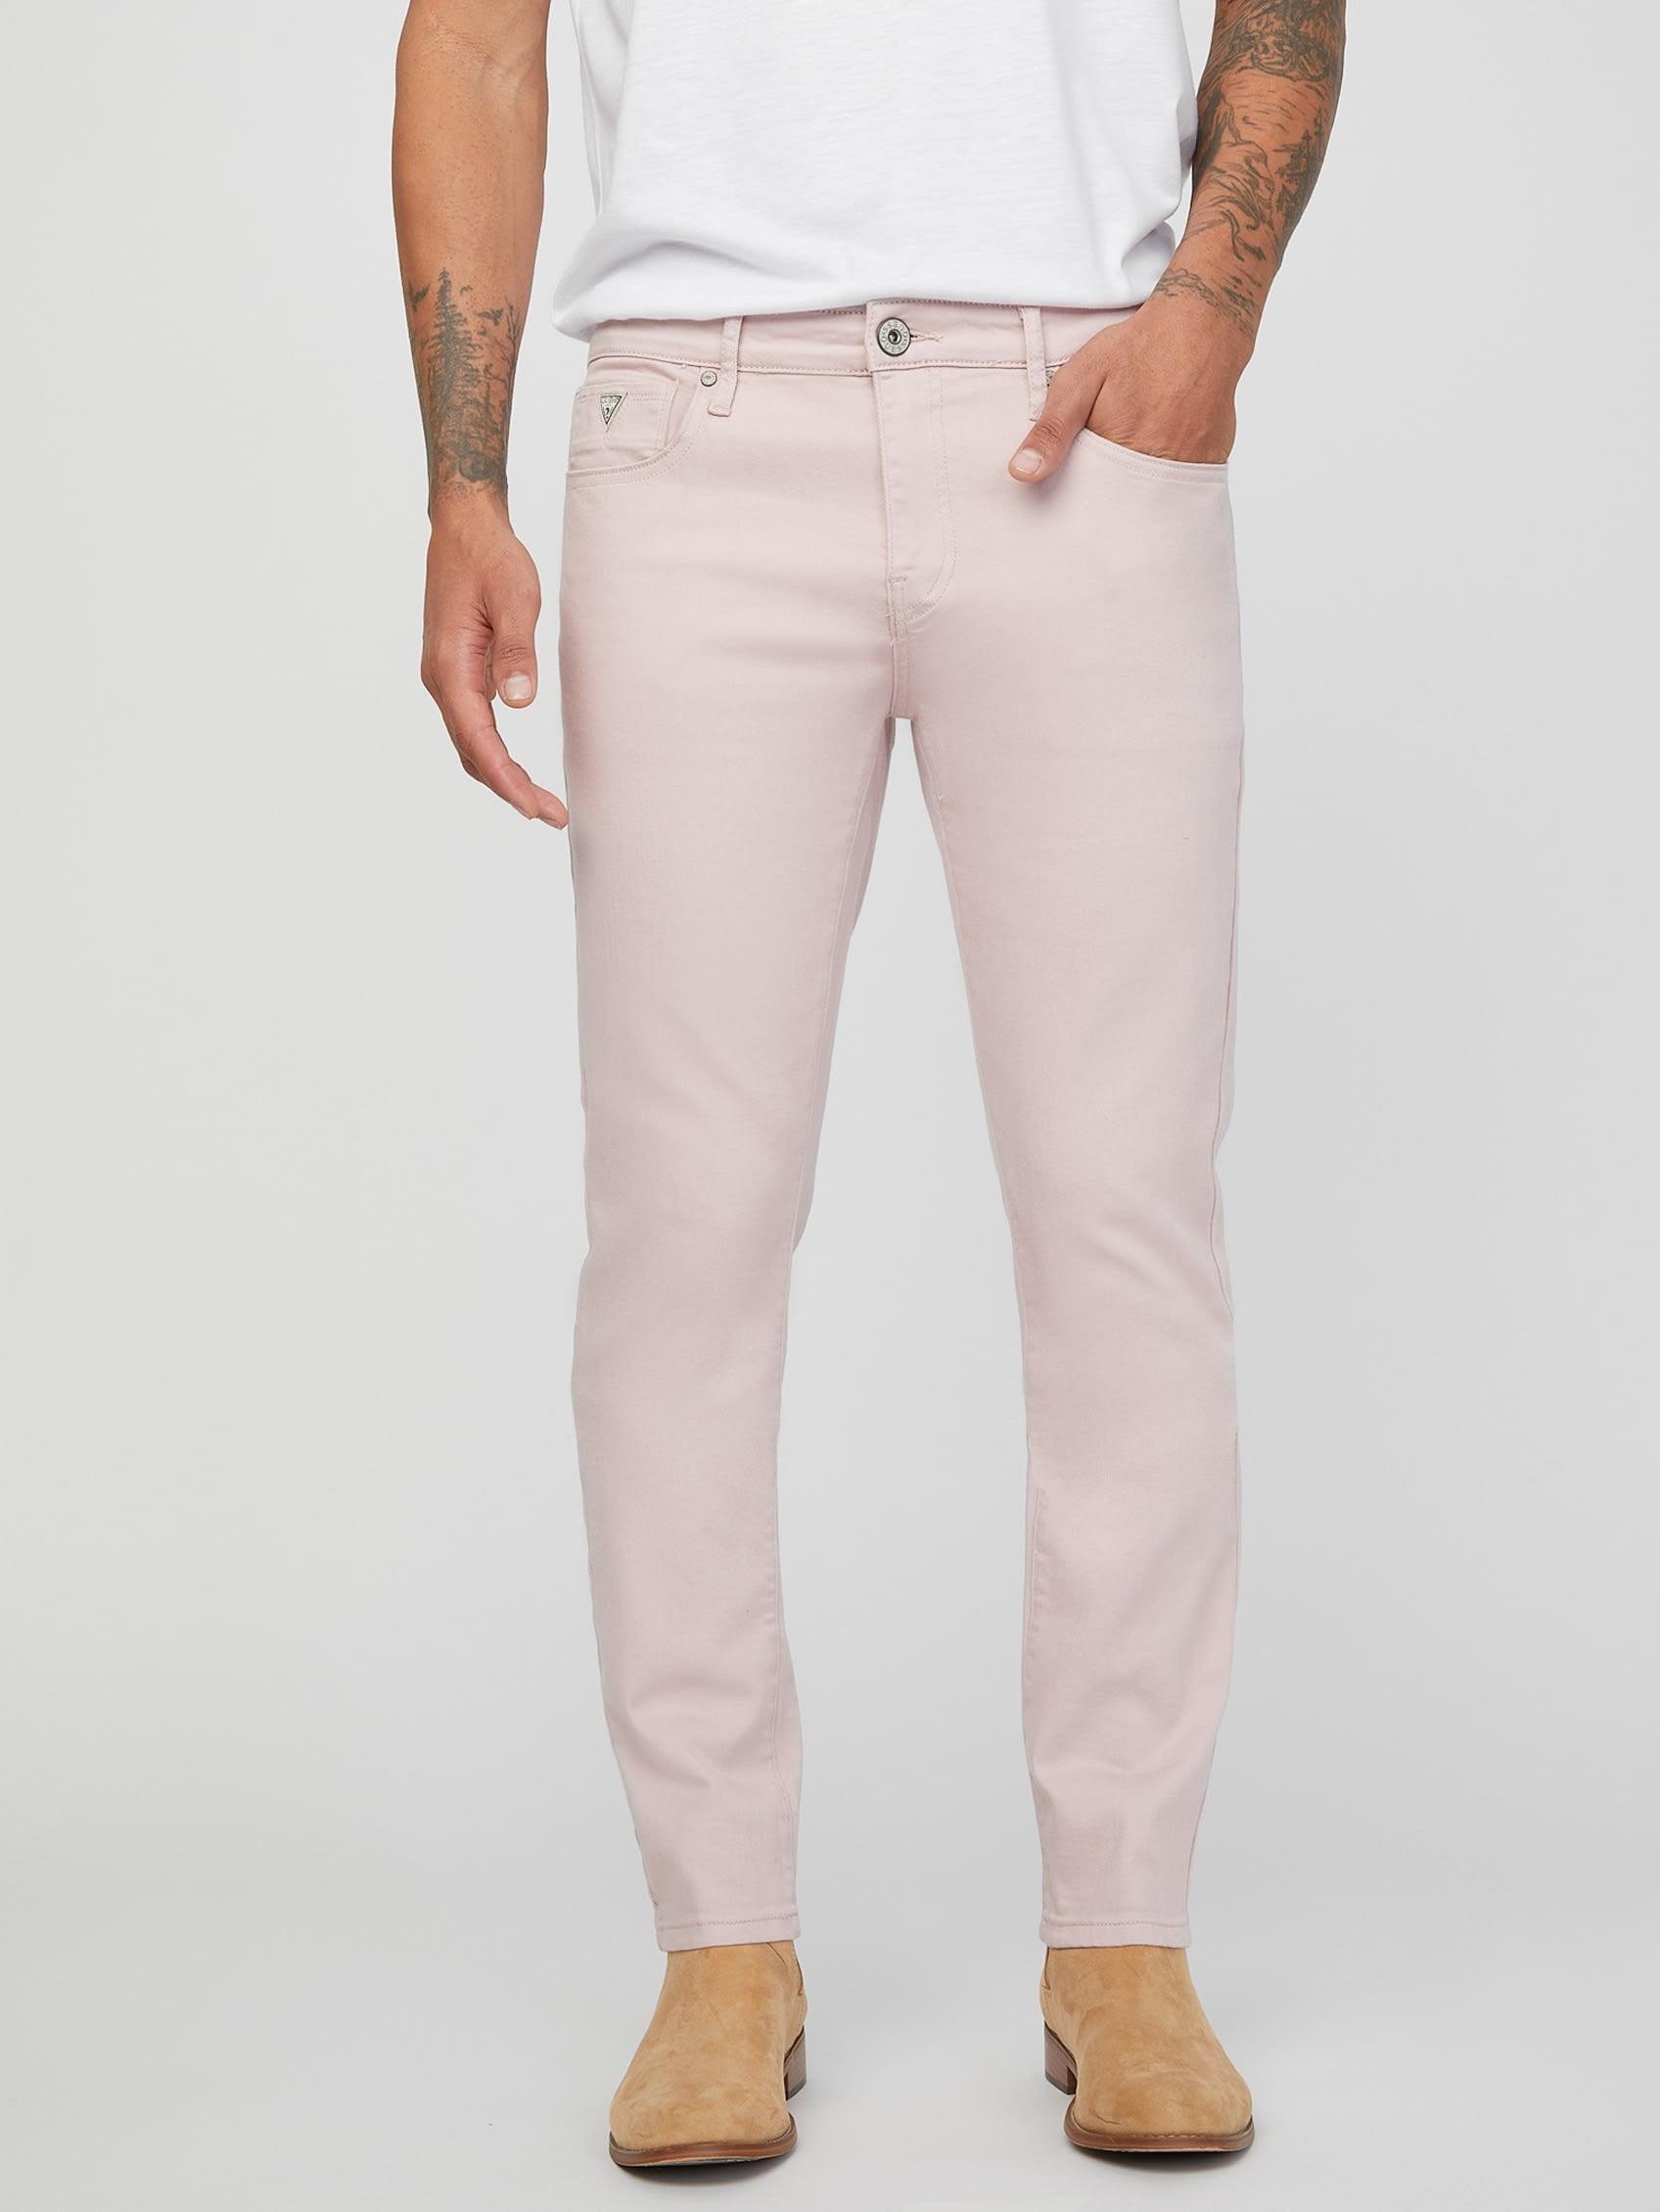 Guess Skinny Jeans for Men Lyst